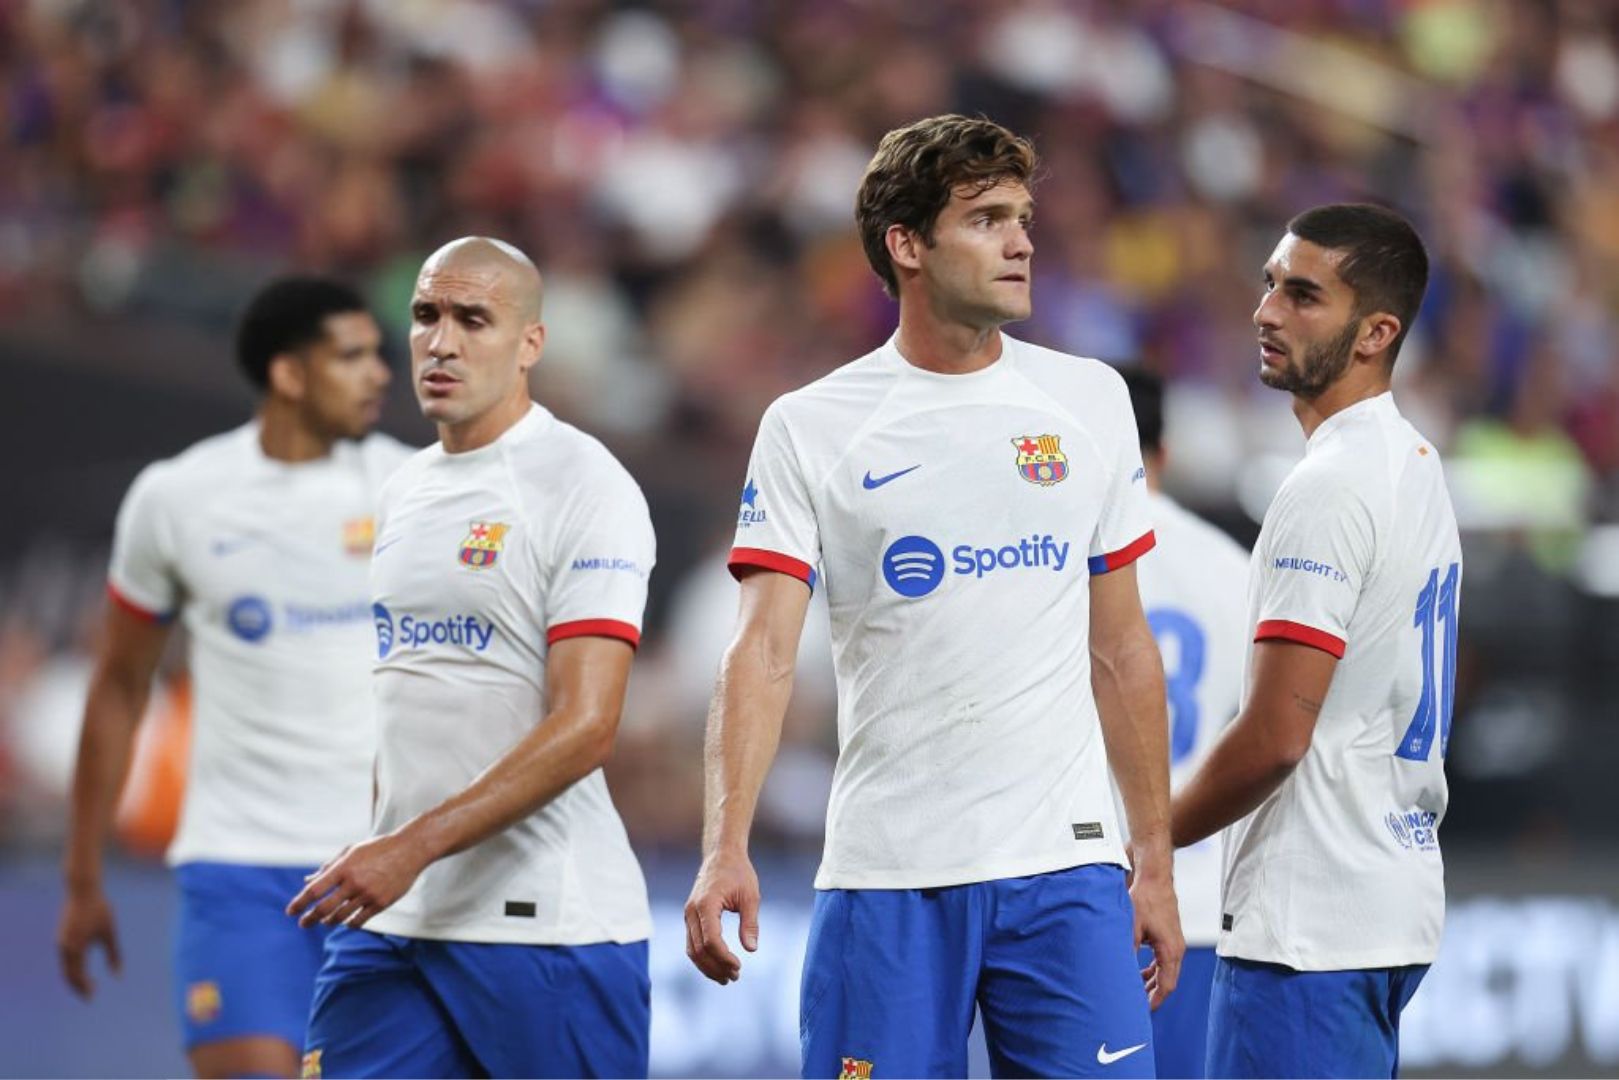 Barcelona players during a game